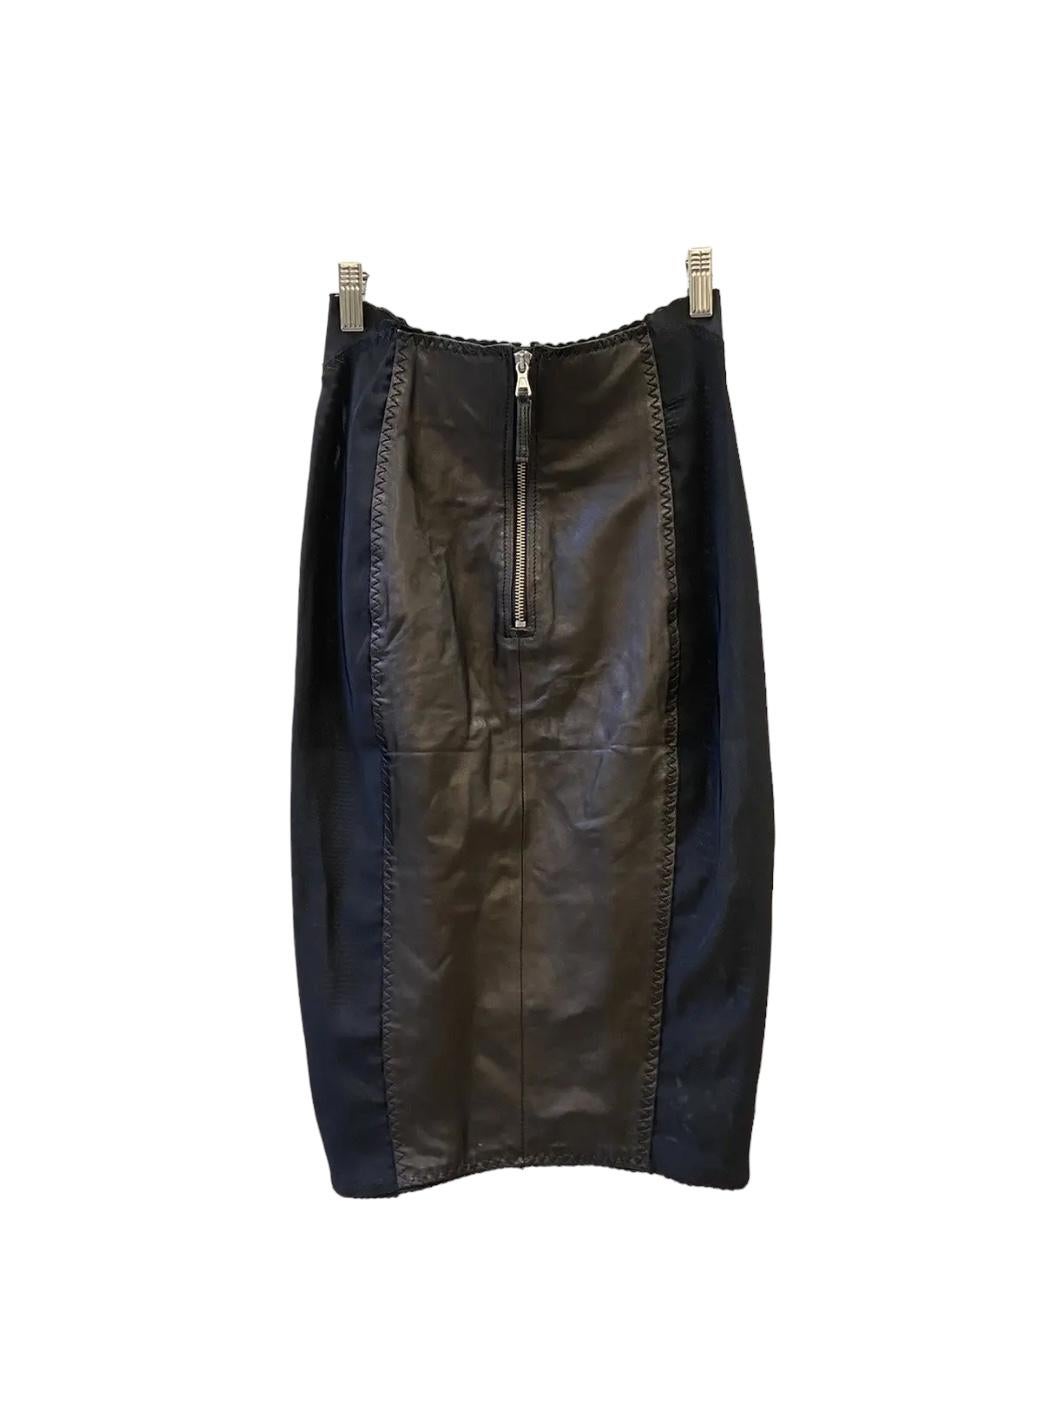 Jean Paul Gaultier
Re-Edition 1987 Leather Skirt
Size IT 38

Beautiful Jean Paul Gaultier 1987 leather skirt. In great condition without flaws, made in Italy.